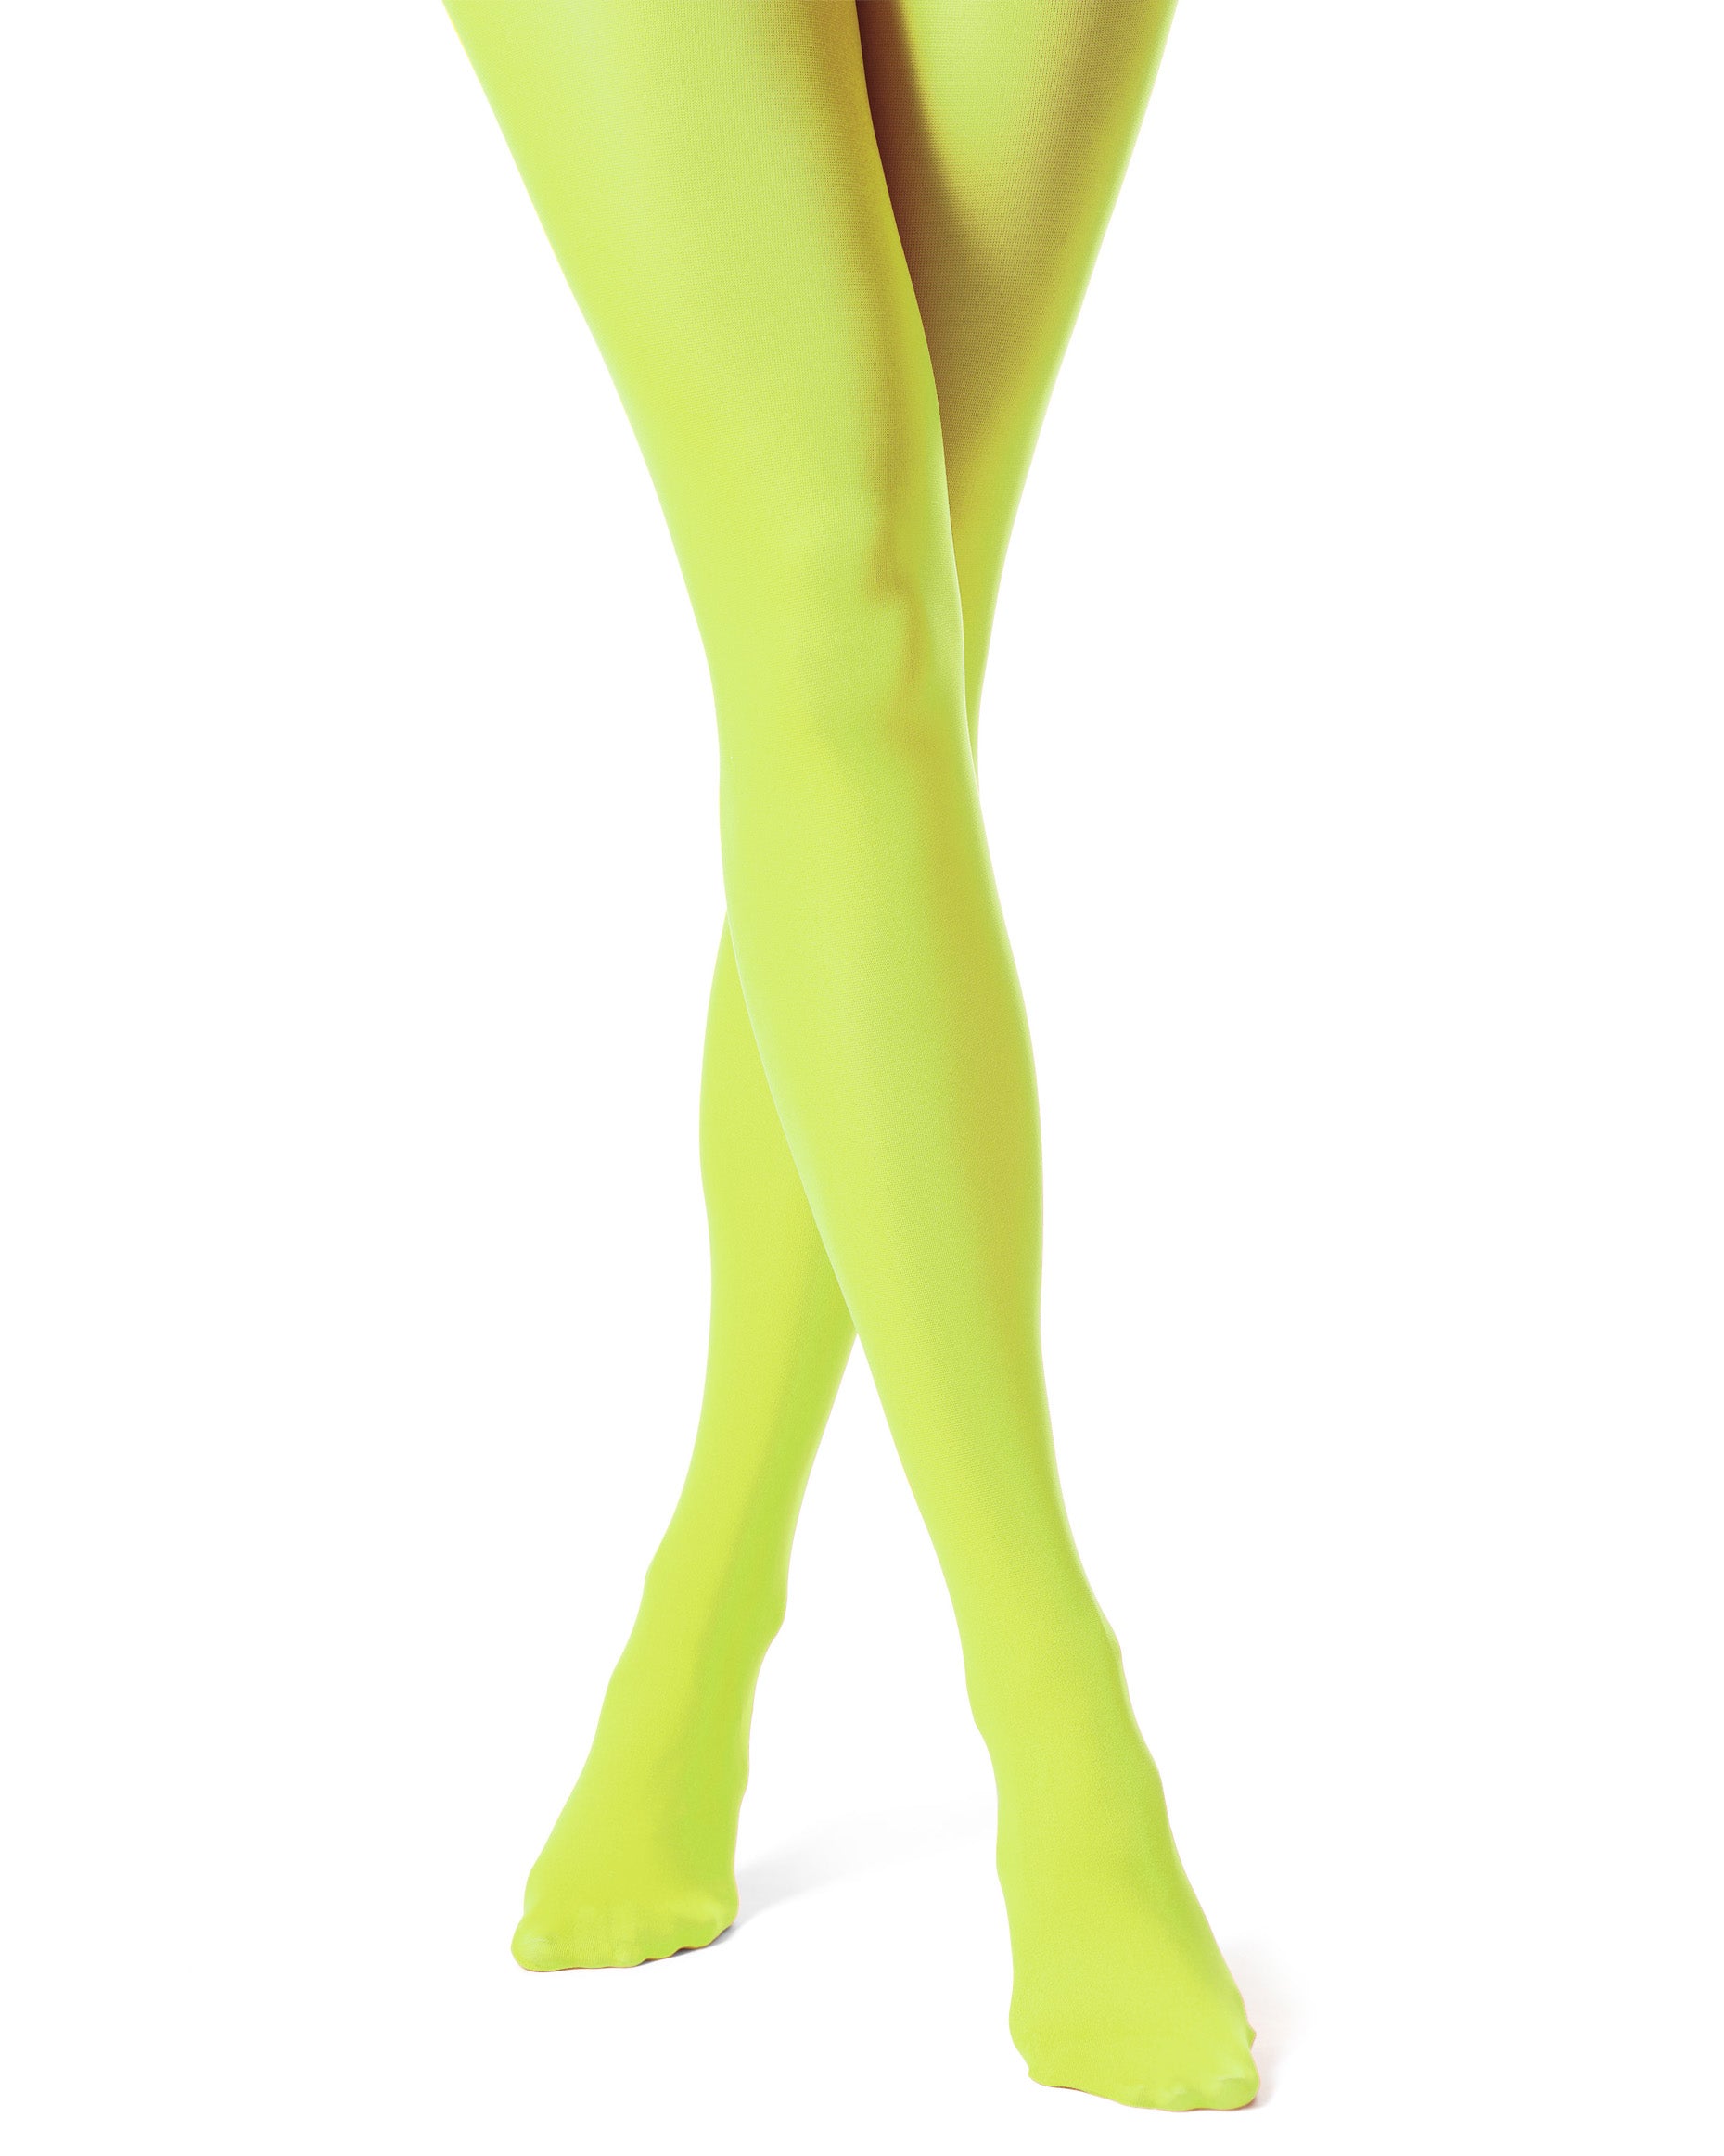 Trasparenze Sophie 70 Collant - coloured opaque tights in bright lime green (citron)